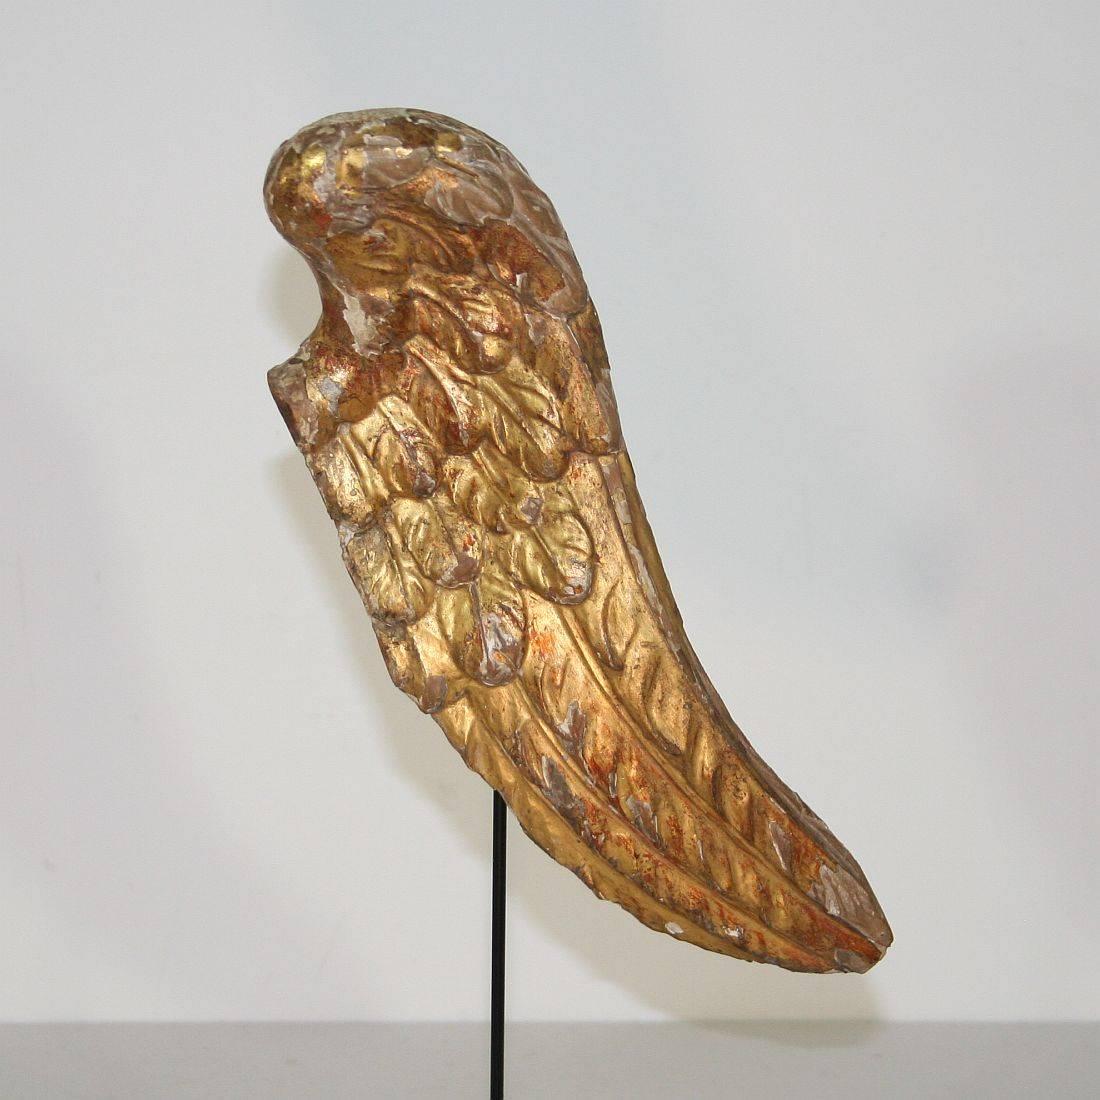 Very nice baroque wooden angel wing with its original gilding. Rare and beautiful piece.
Italy, circa 1750
Weathered.
Measurement is with the wooden base.